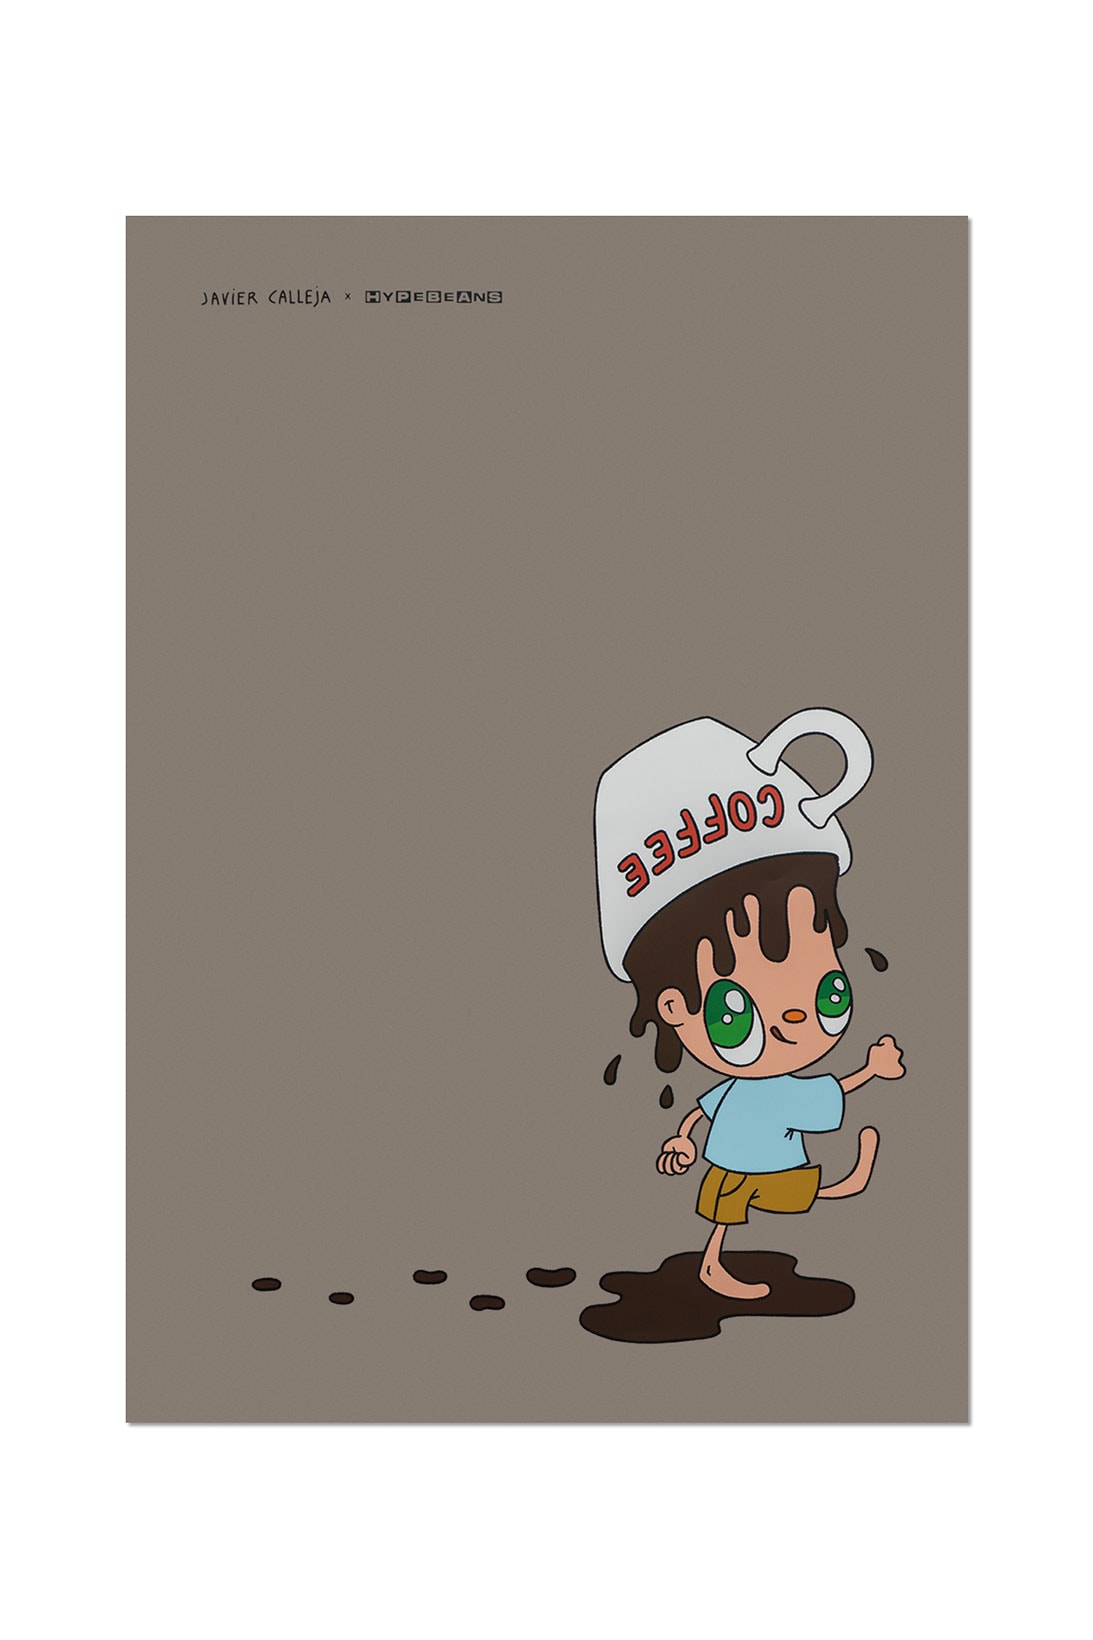 Hypebeans Javier Calleja Collaboration Coffee Keychain T-Shirt Poster Release Where to buy